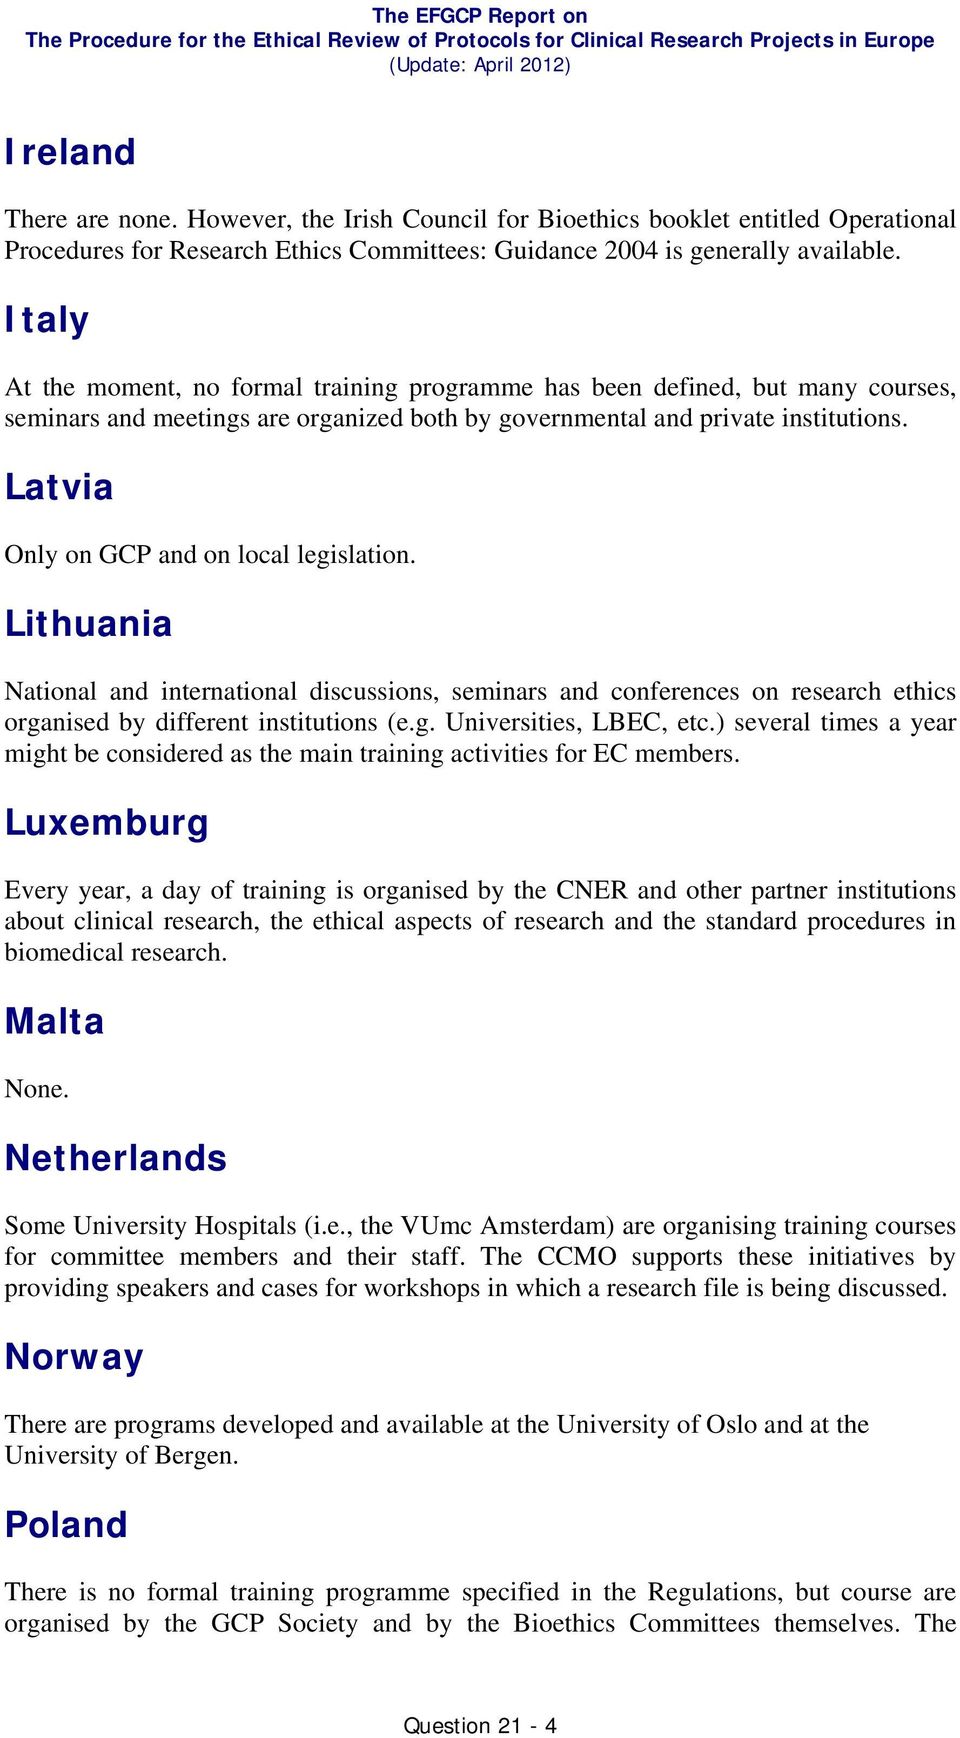 Latvia Only on GCP and on local legislation. Lithuania National and international discussions, seminars and conferences on research ethics organised by different institutions (e.g. Universities, LBEC, etc.